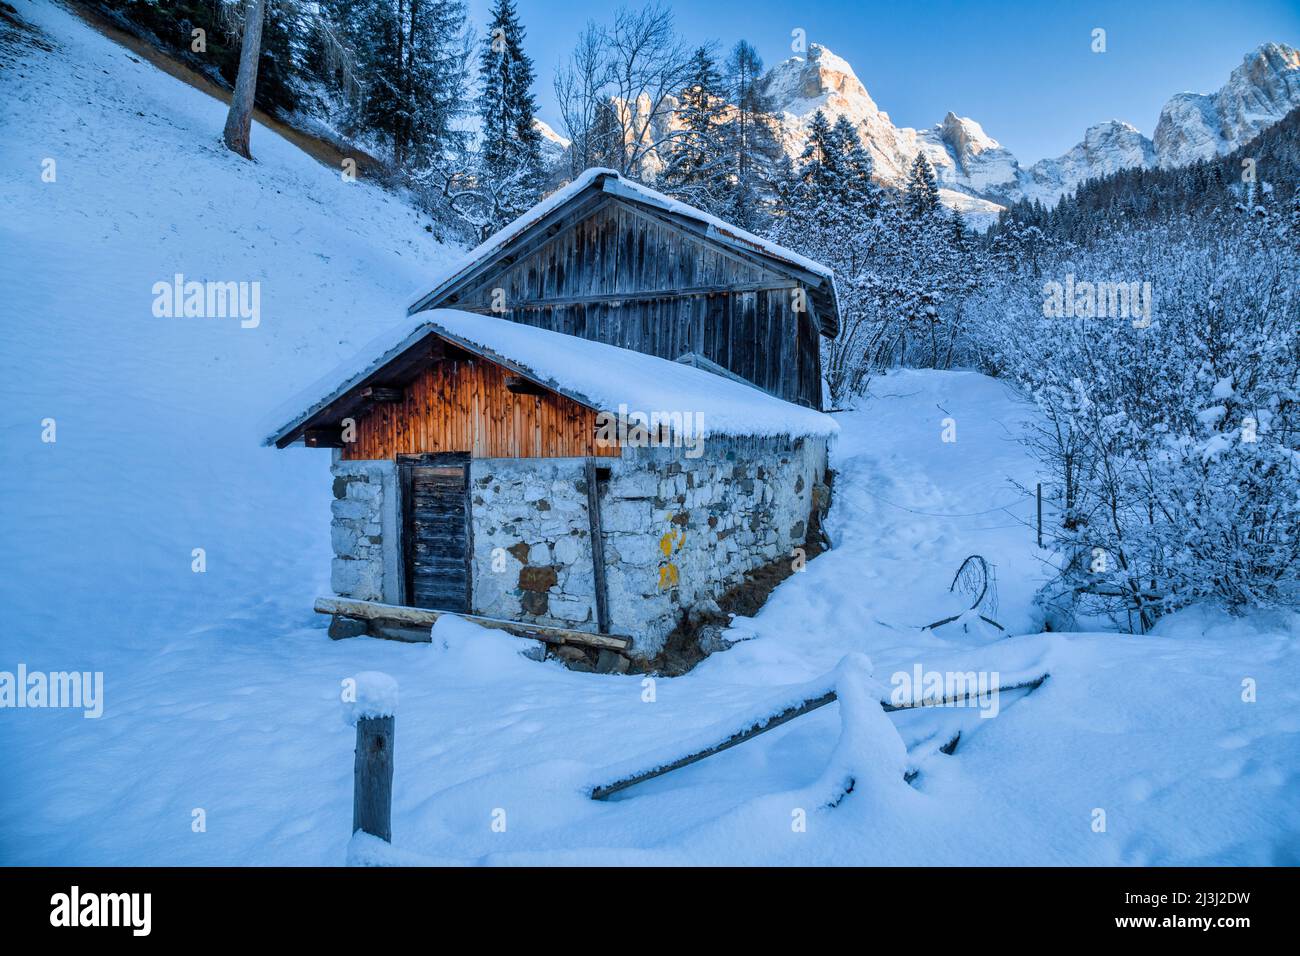 Europe, Italy, Province of Belluno, La Valley Agordina, old rural buildings in winter, snowy landscape, in the background the chain of the San Sebastiano Stock Photo